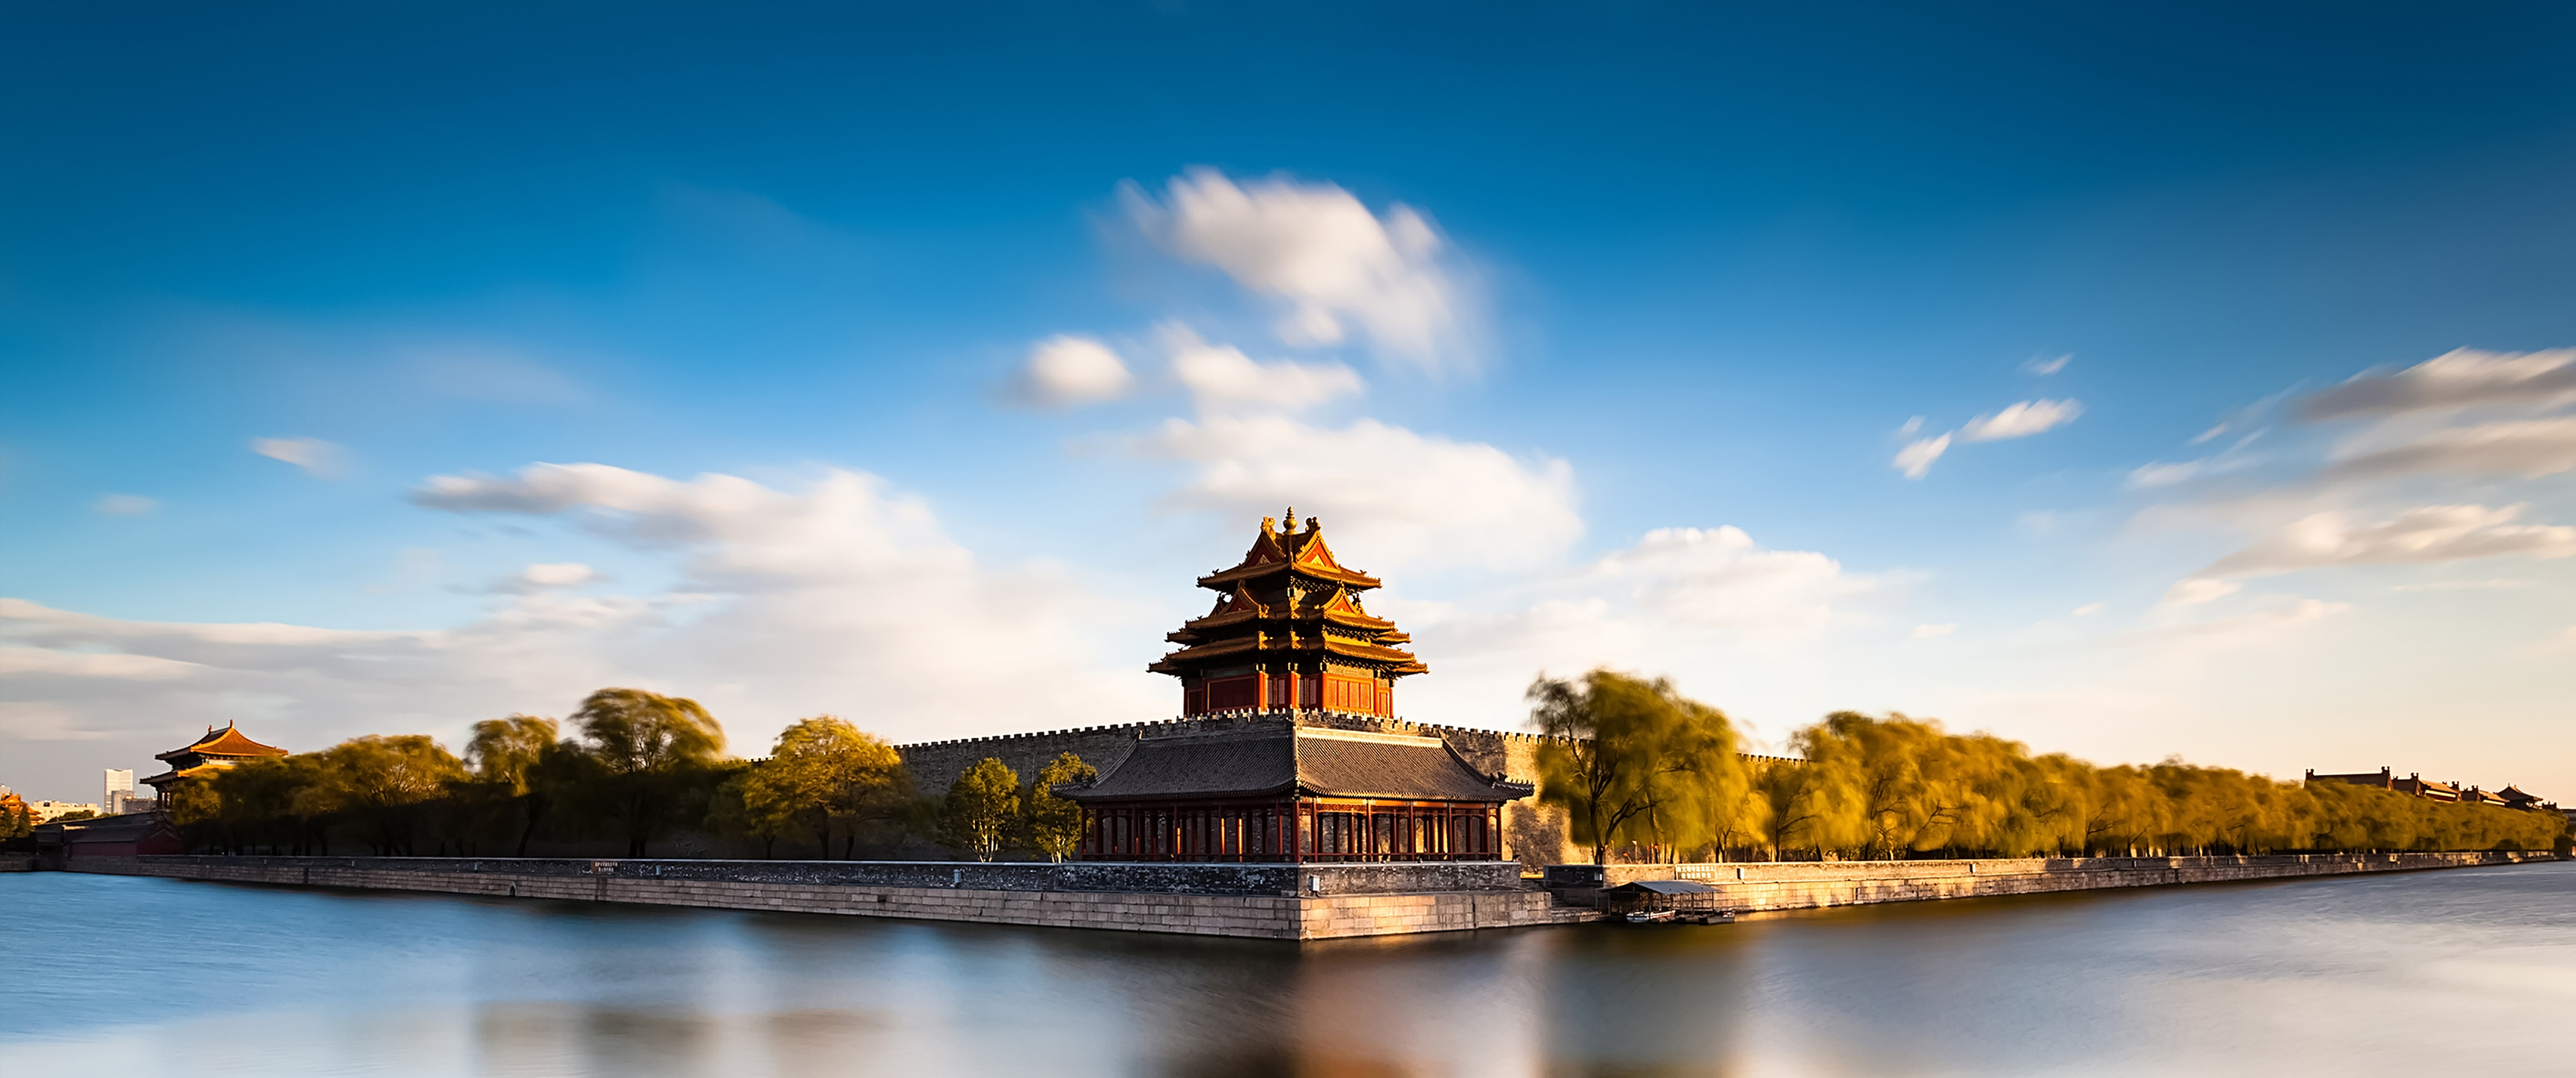 General 3440x1440 ultrawide China photography architecture Beijing Asia palace building reflection